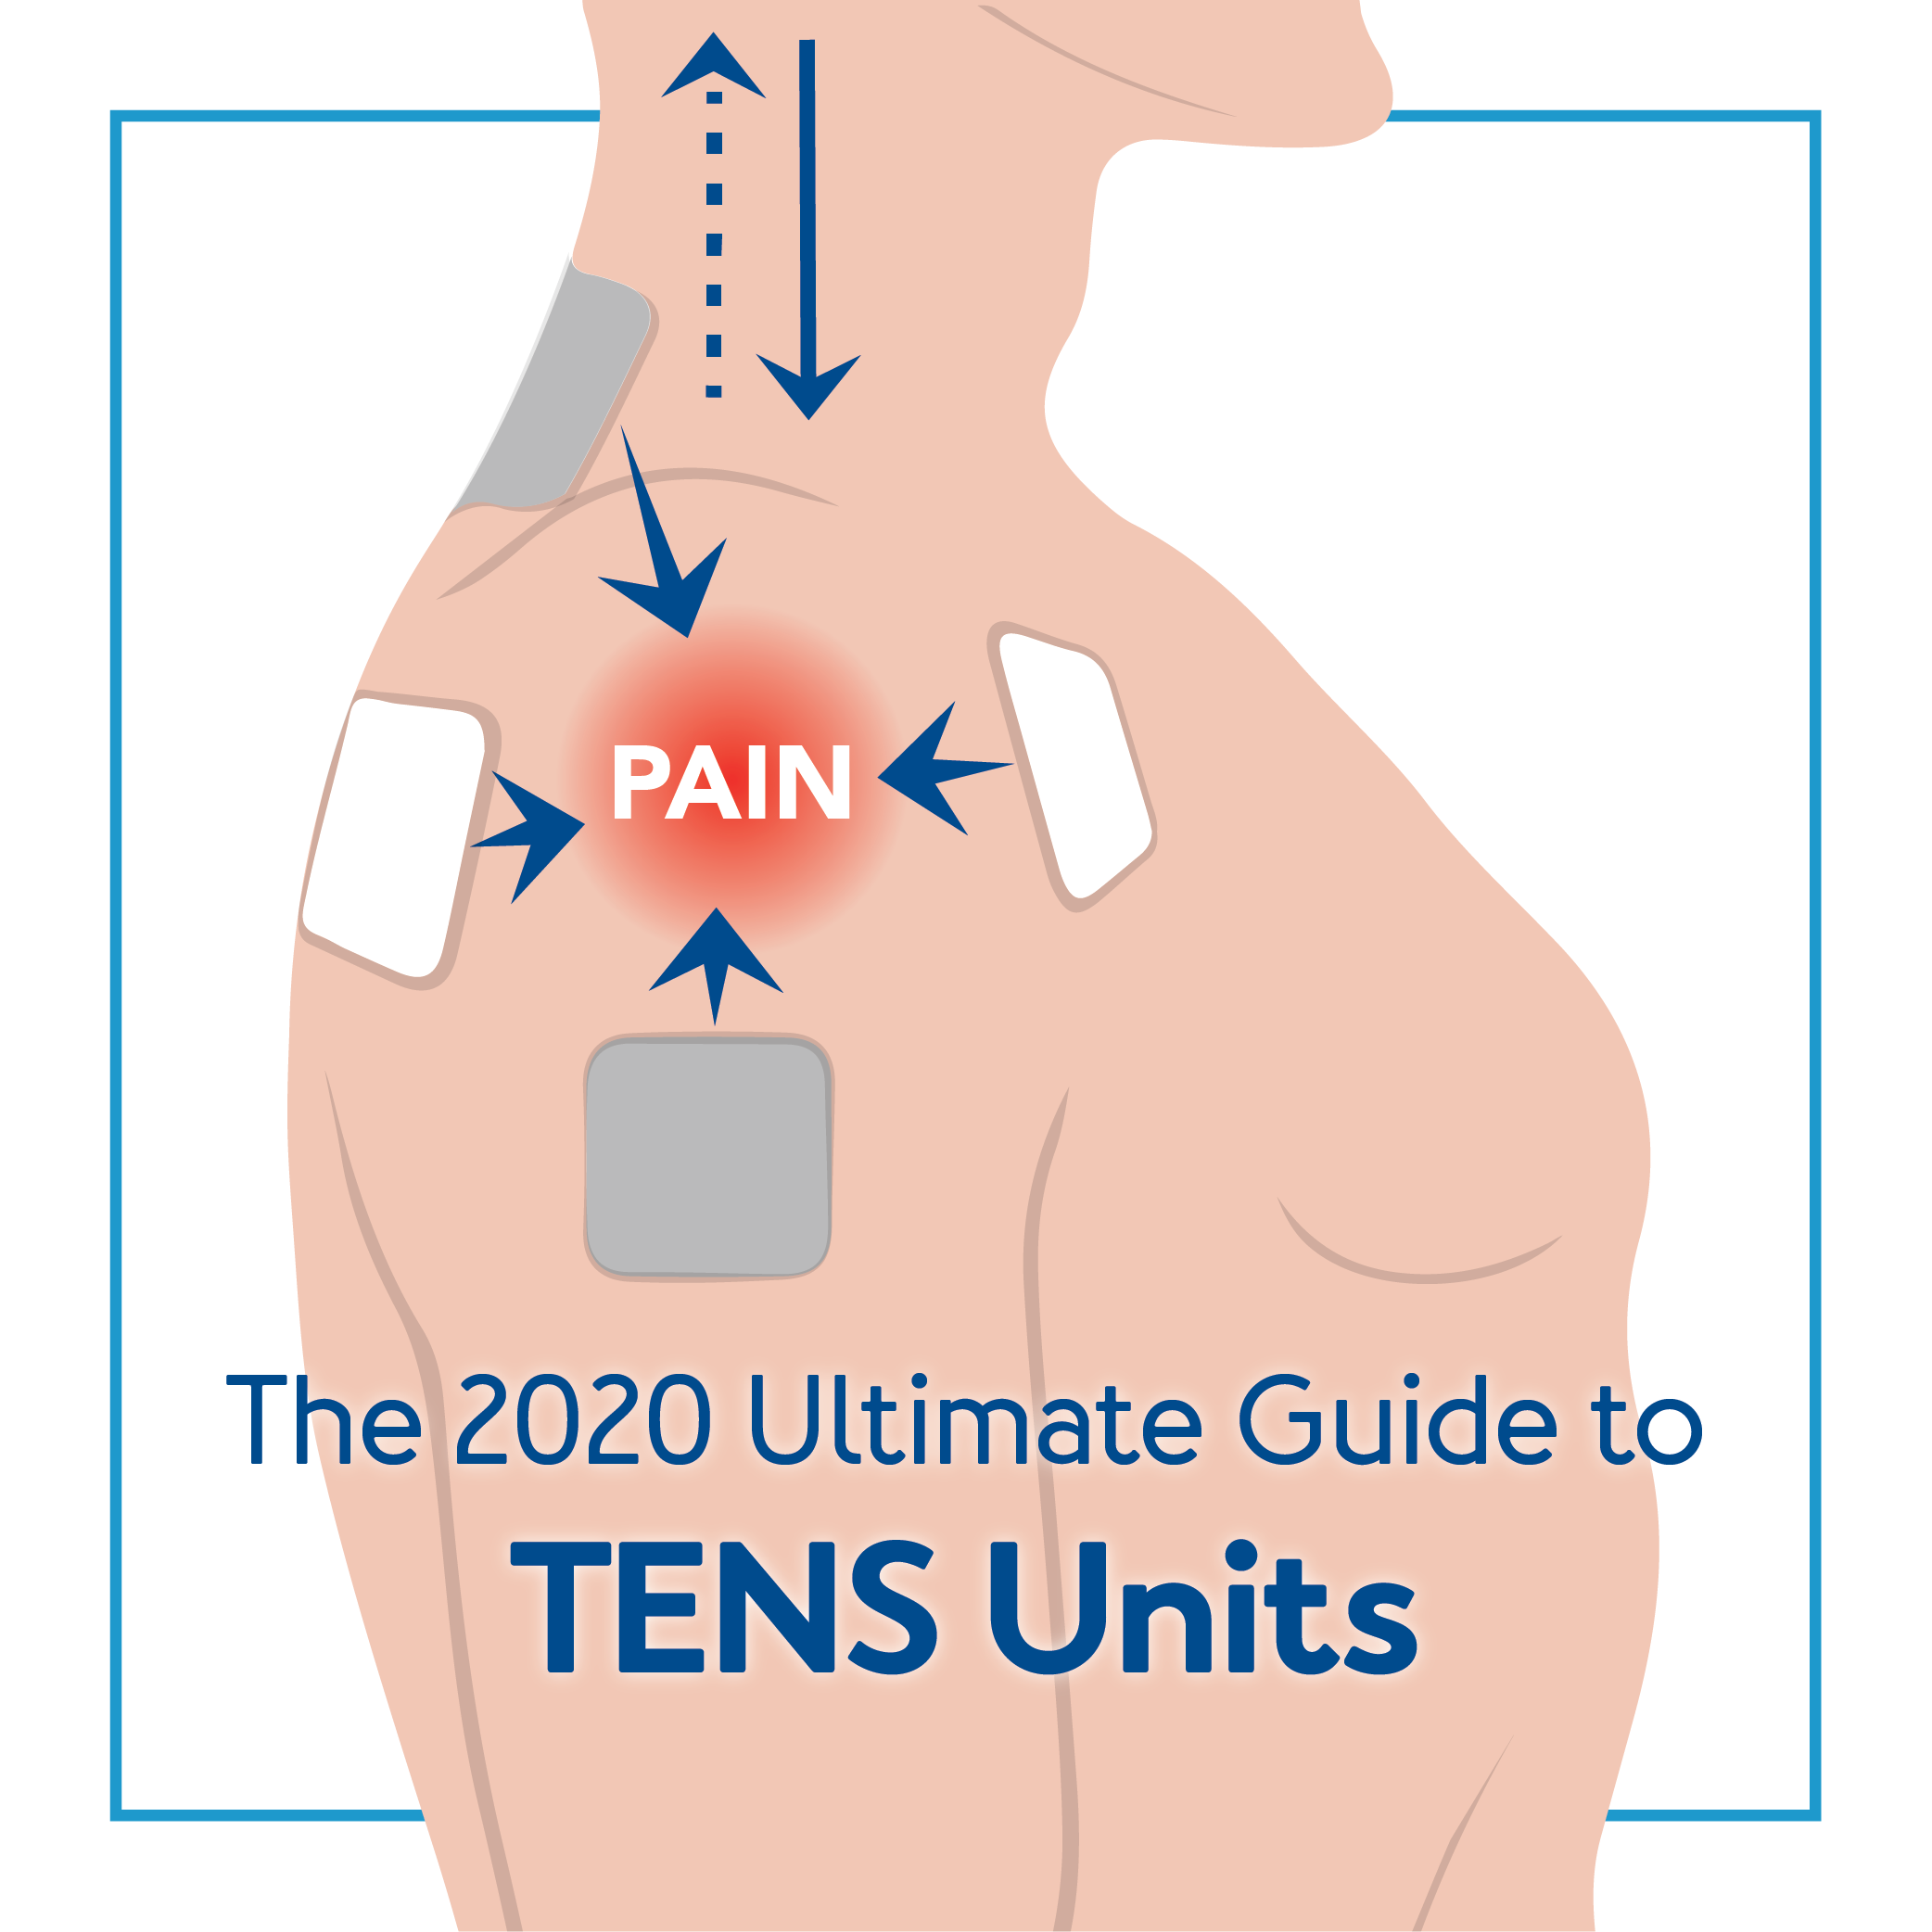 The 2020 Ultimate Guide to TENS Units